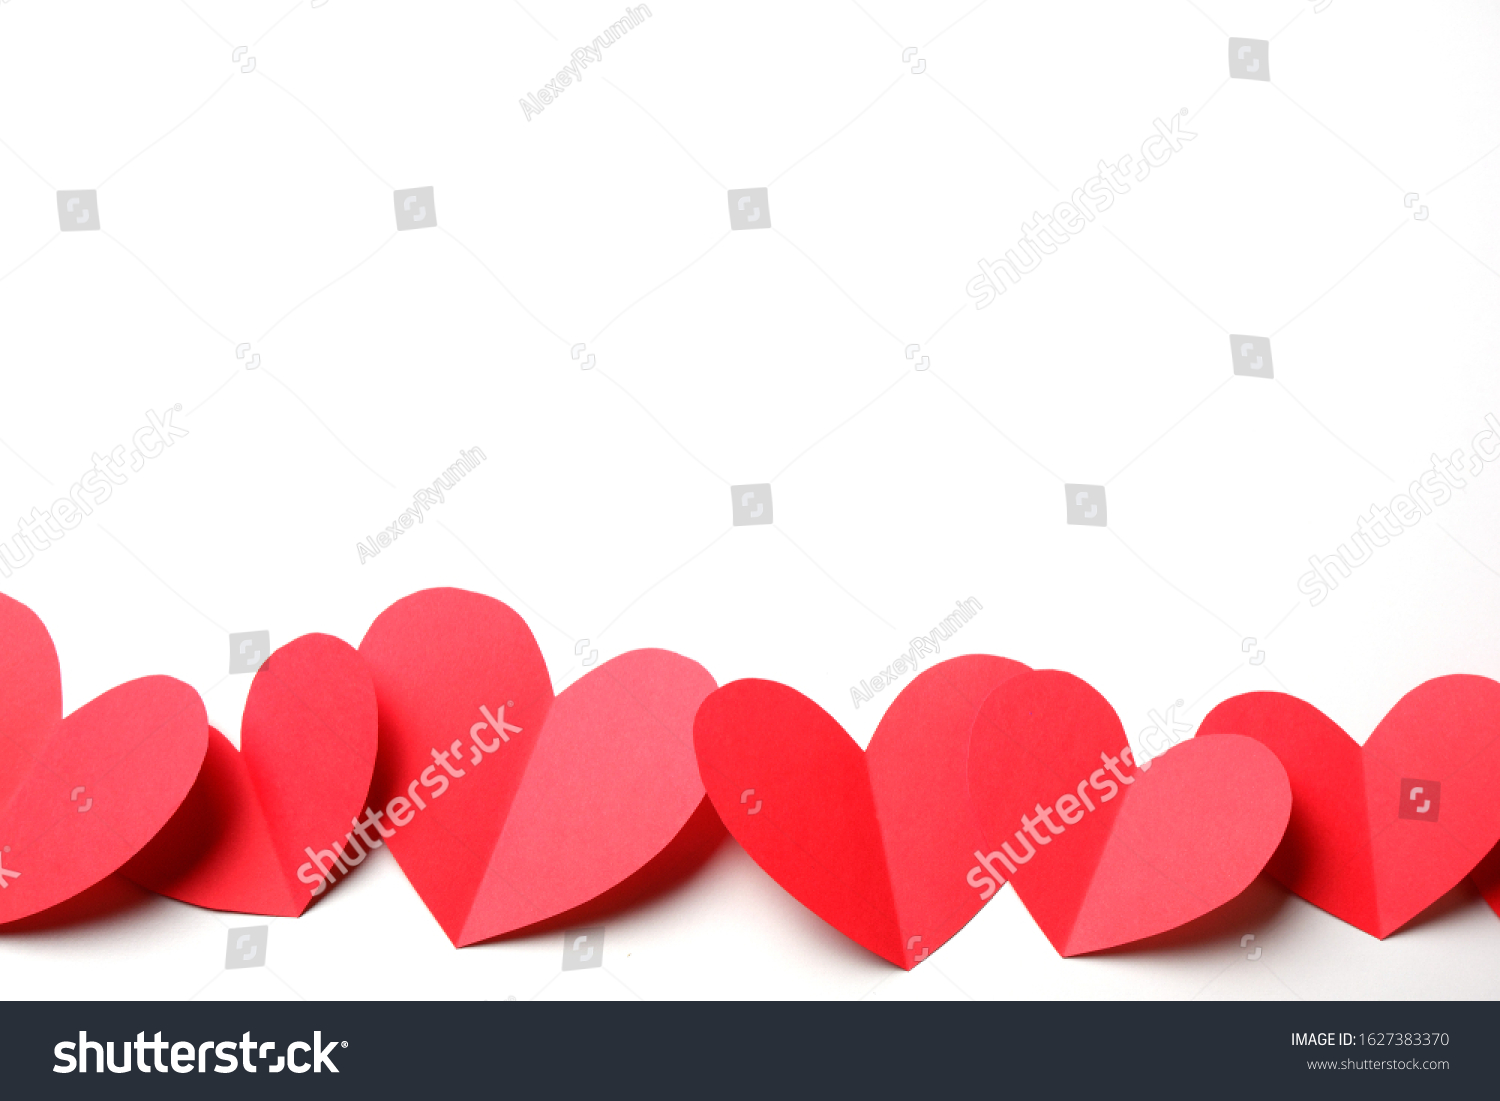 Cut out of red paper hearts on white background isolated. Cute Valentines day, Womans day, love, romantic or wedding composition with free space for your text for banner, congratulation, card, offer, flyer, advertising, invitation.